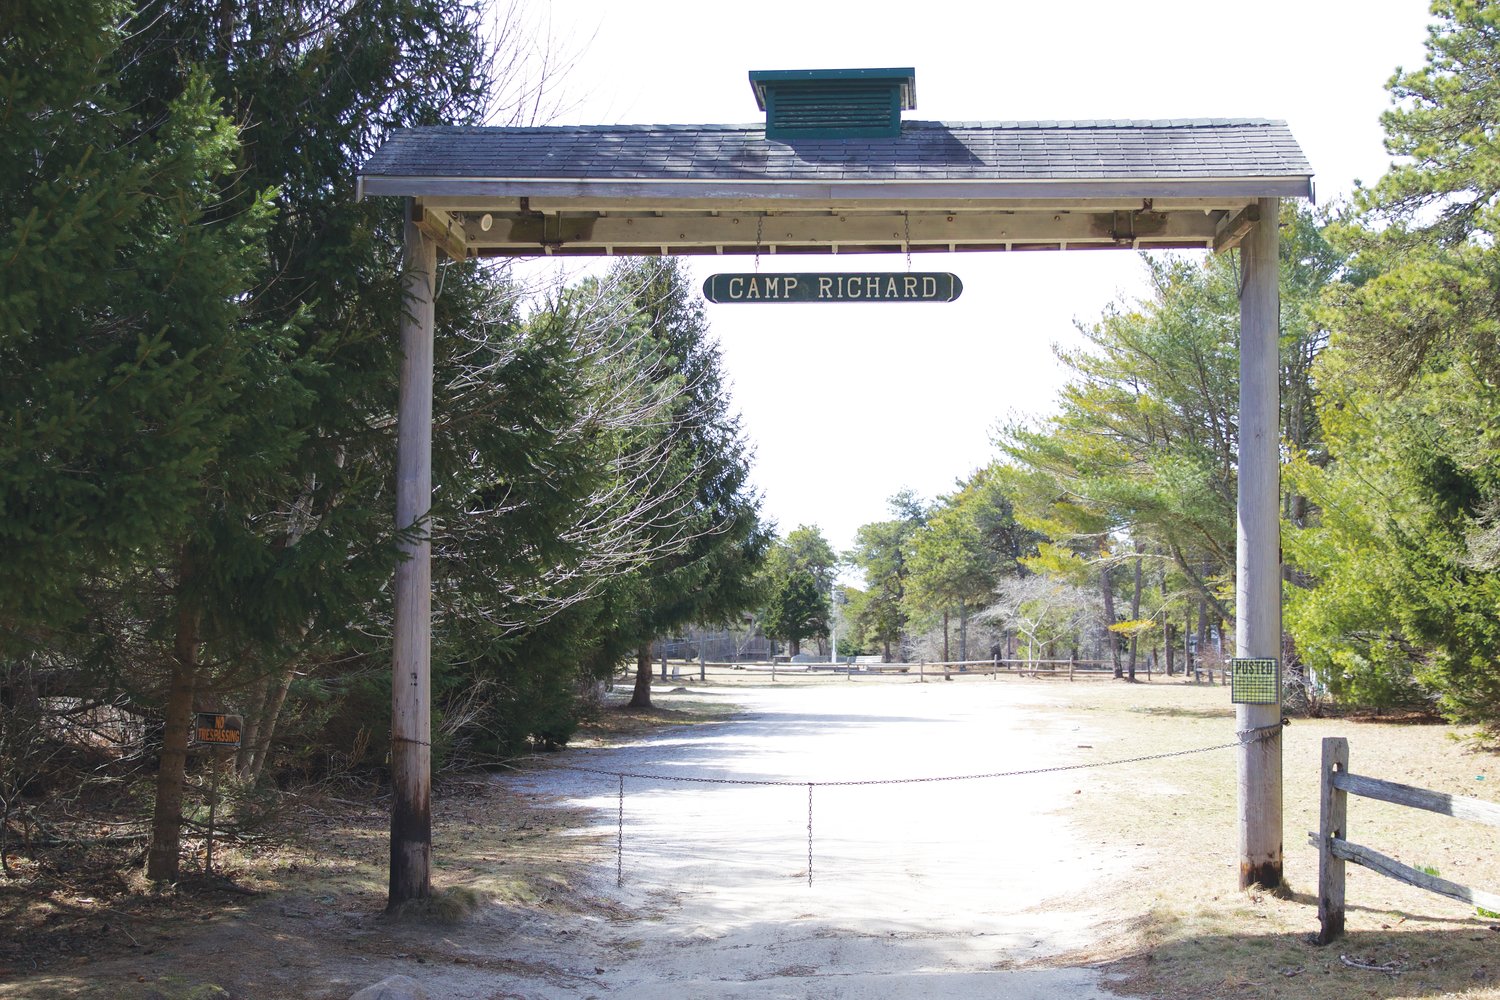 The entrance to Boy Scout Camp Richard.